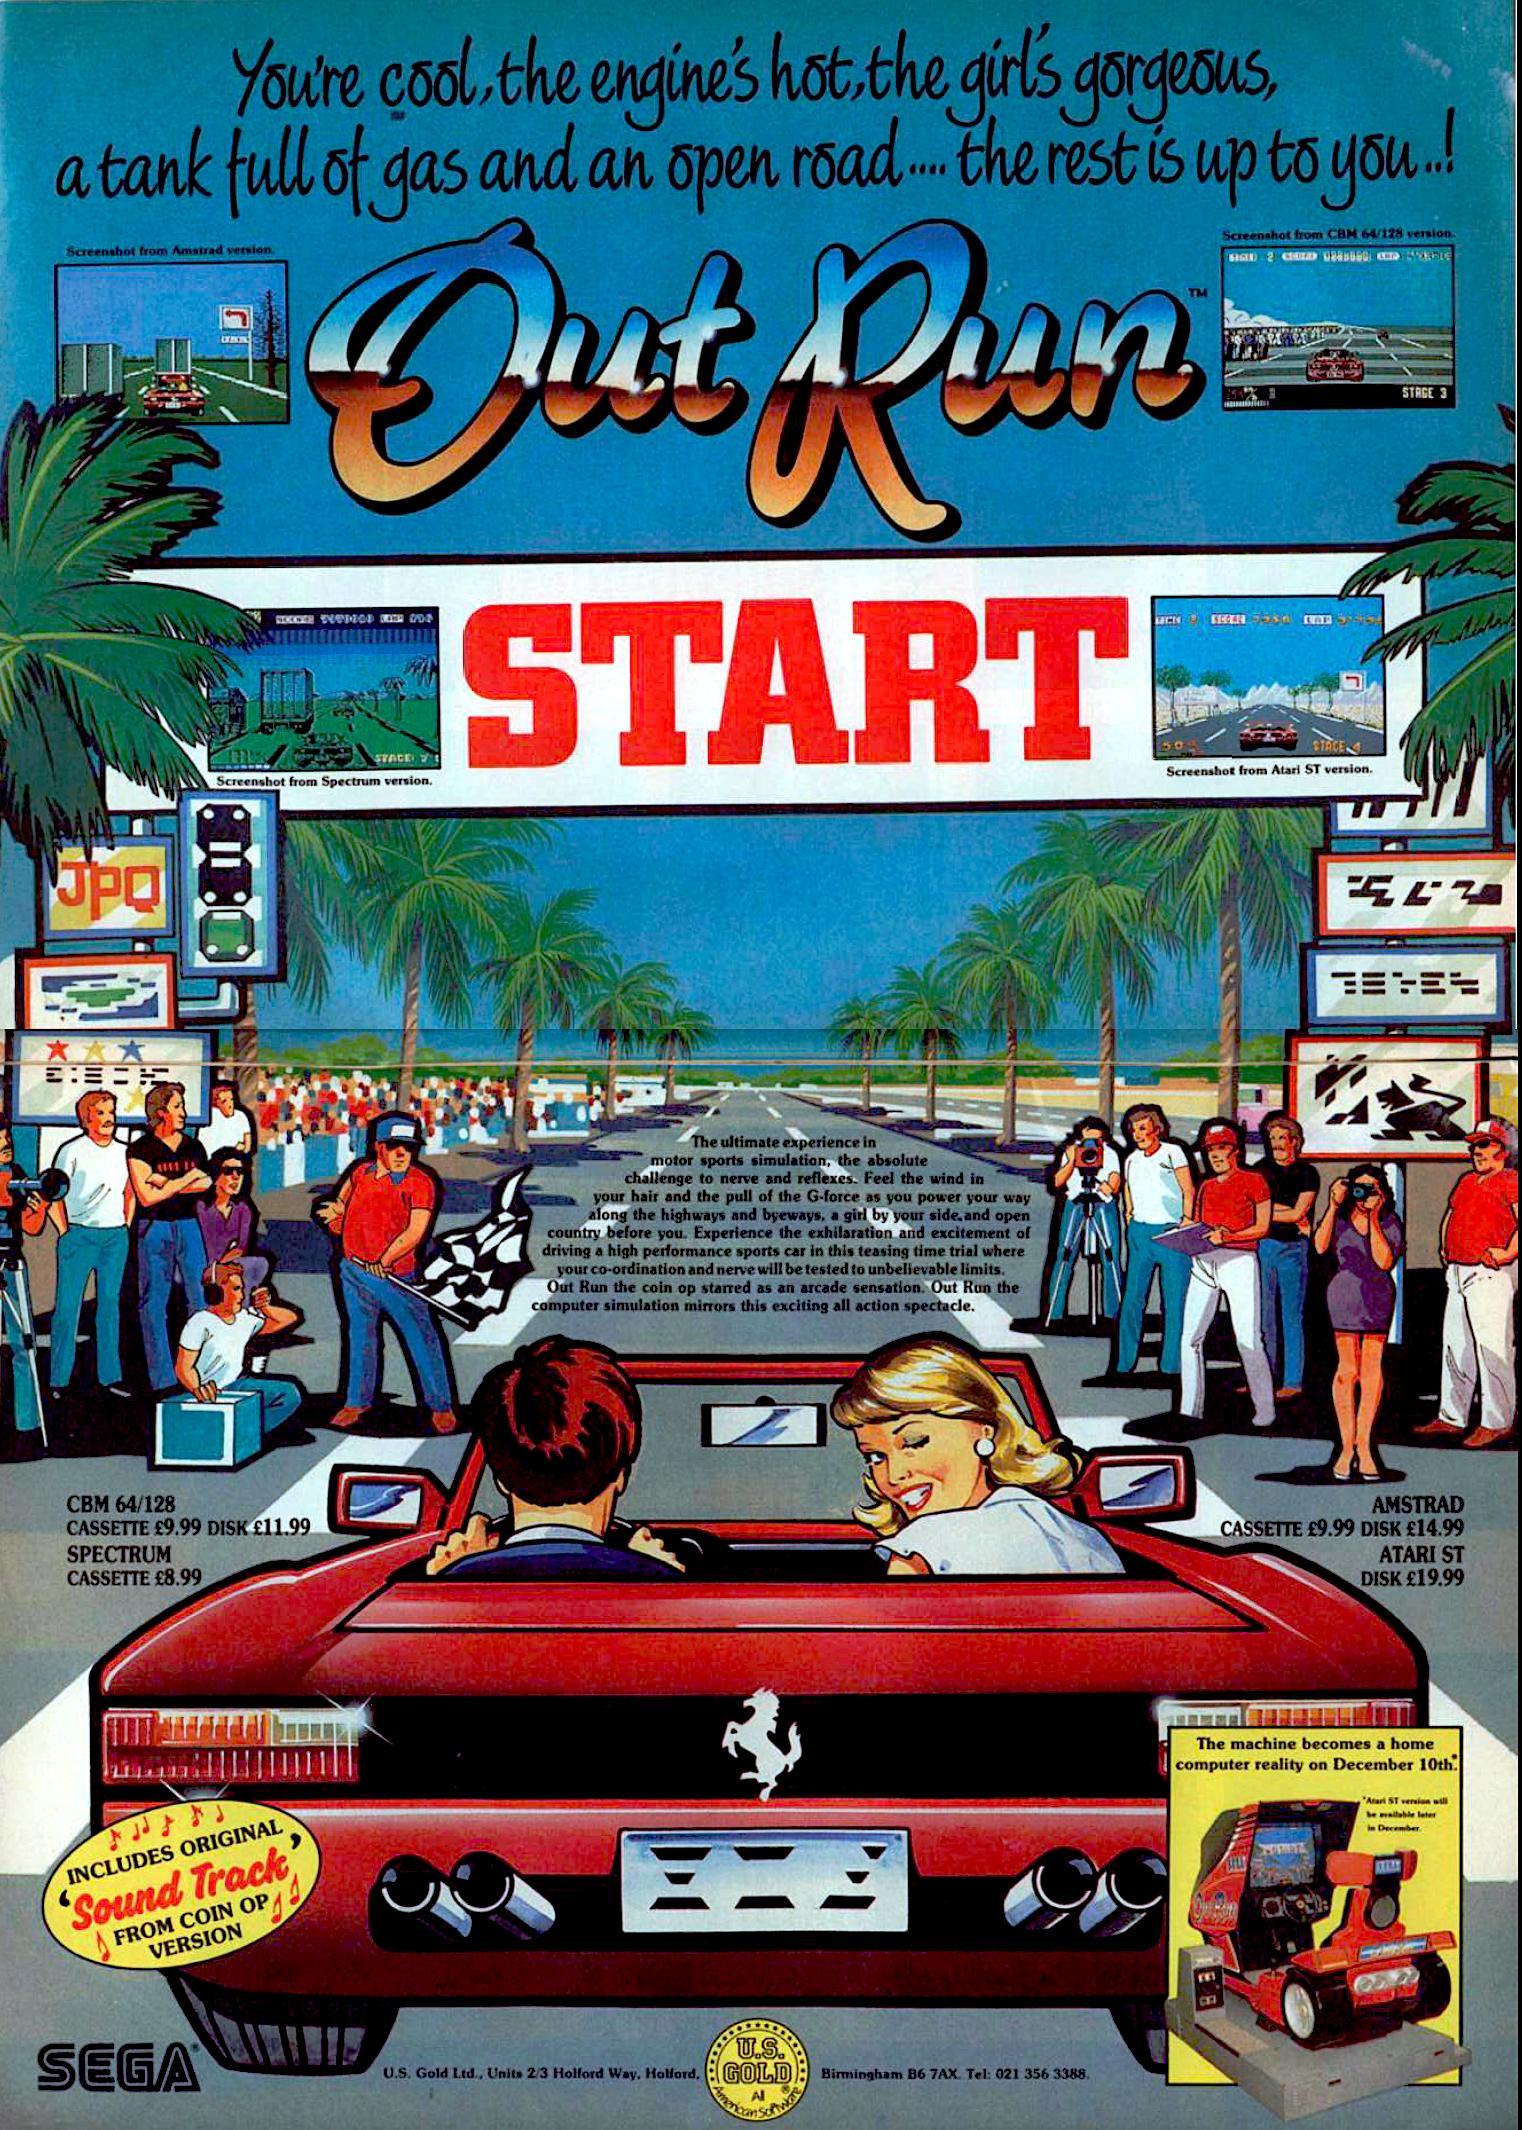 Image For Post | OutRun is a racing game that allows the player to race across varied terrain in a readily available Ferrari, complete with a female passenger, over a series of short tracks.

Gameplay is viewed from just above and behind the car. The roads are full of sharp bends and hazards, contact with which can cause the car to roll and lose the player's time. On each section of track there is a fork in the road, allowing the player to choose which direction he or she wishes to go in. The player has to to complete five track sections in total, out of the fifteen in the game.